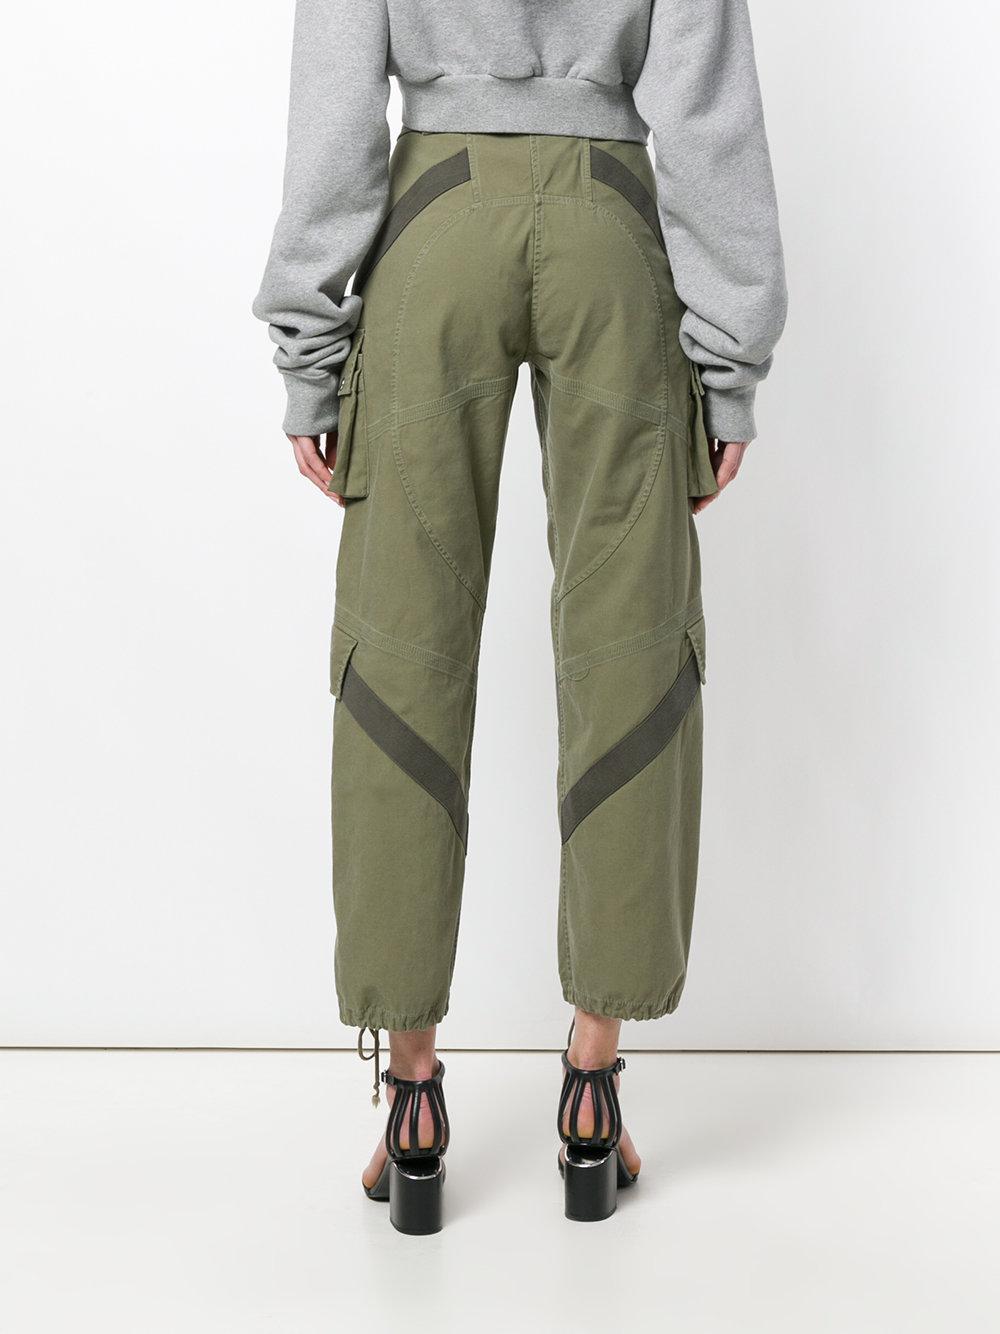 Alexander Wang High Waisted Multi-pocket Trousers in Green - Lyst